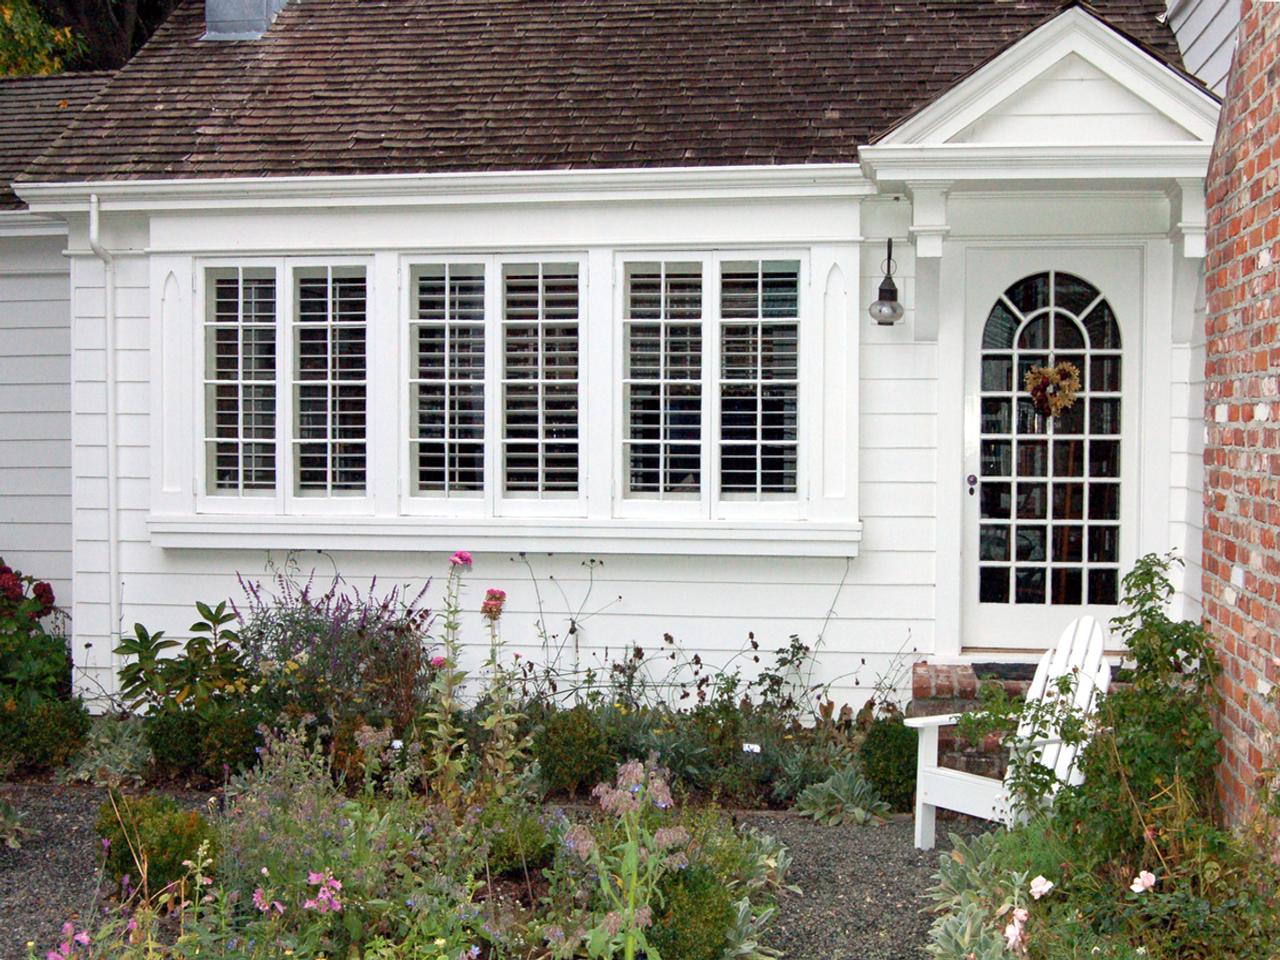 Outside view of traditional style house with plantation shutters